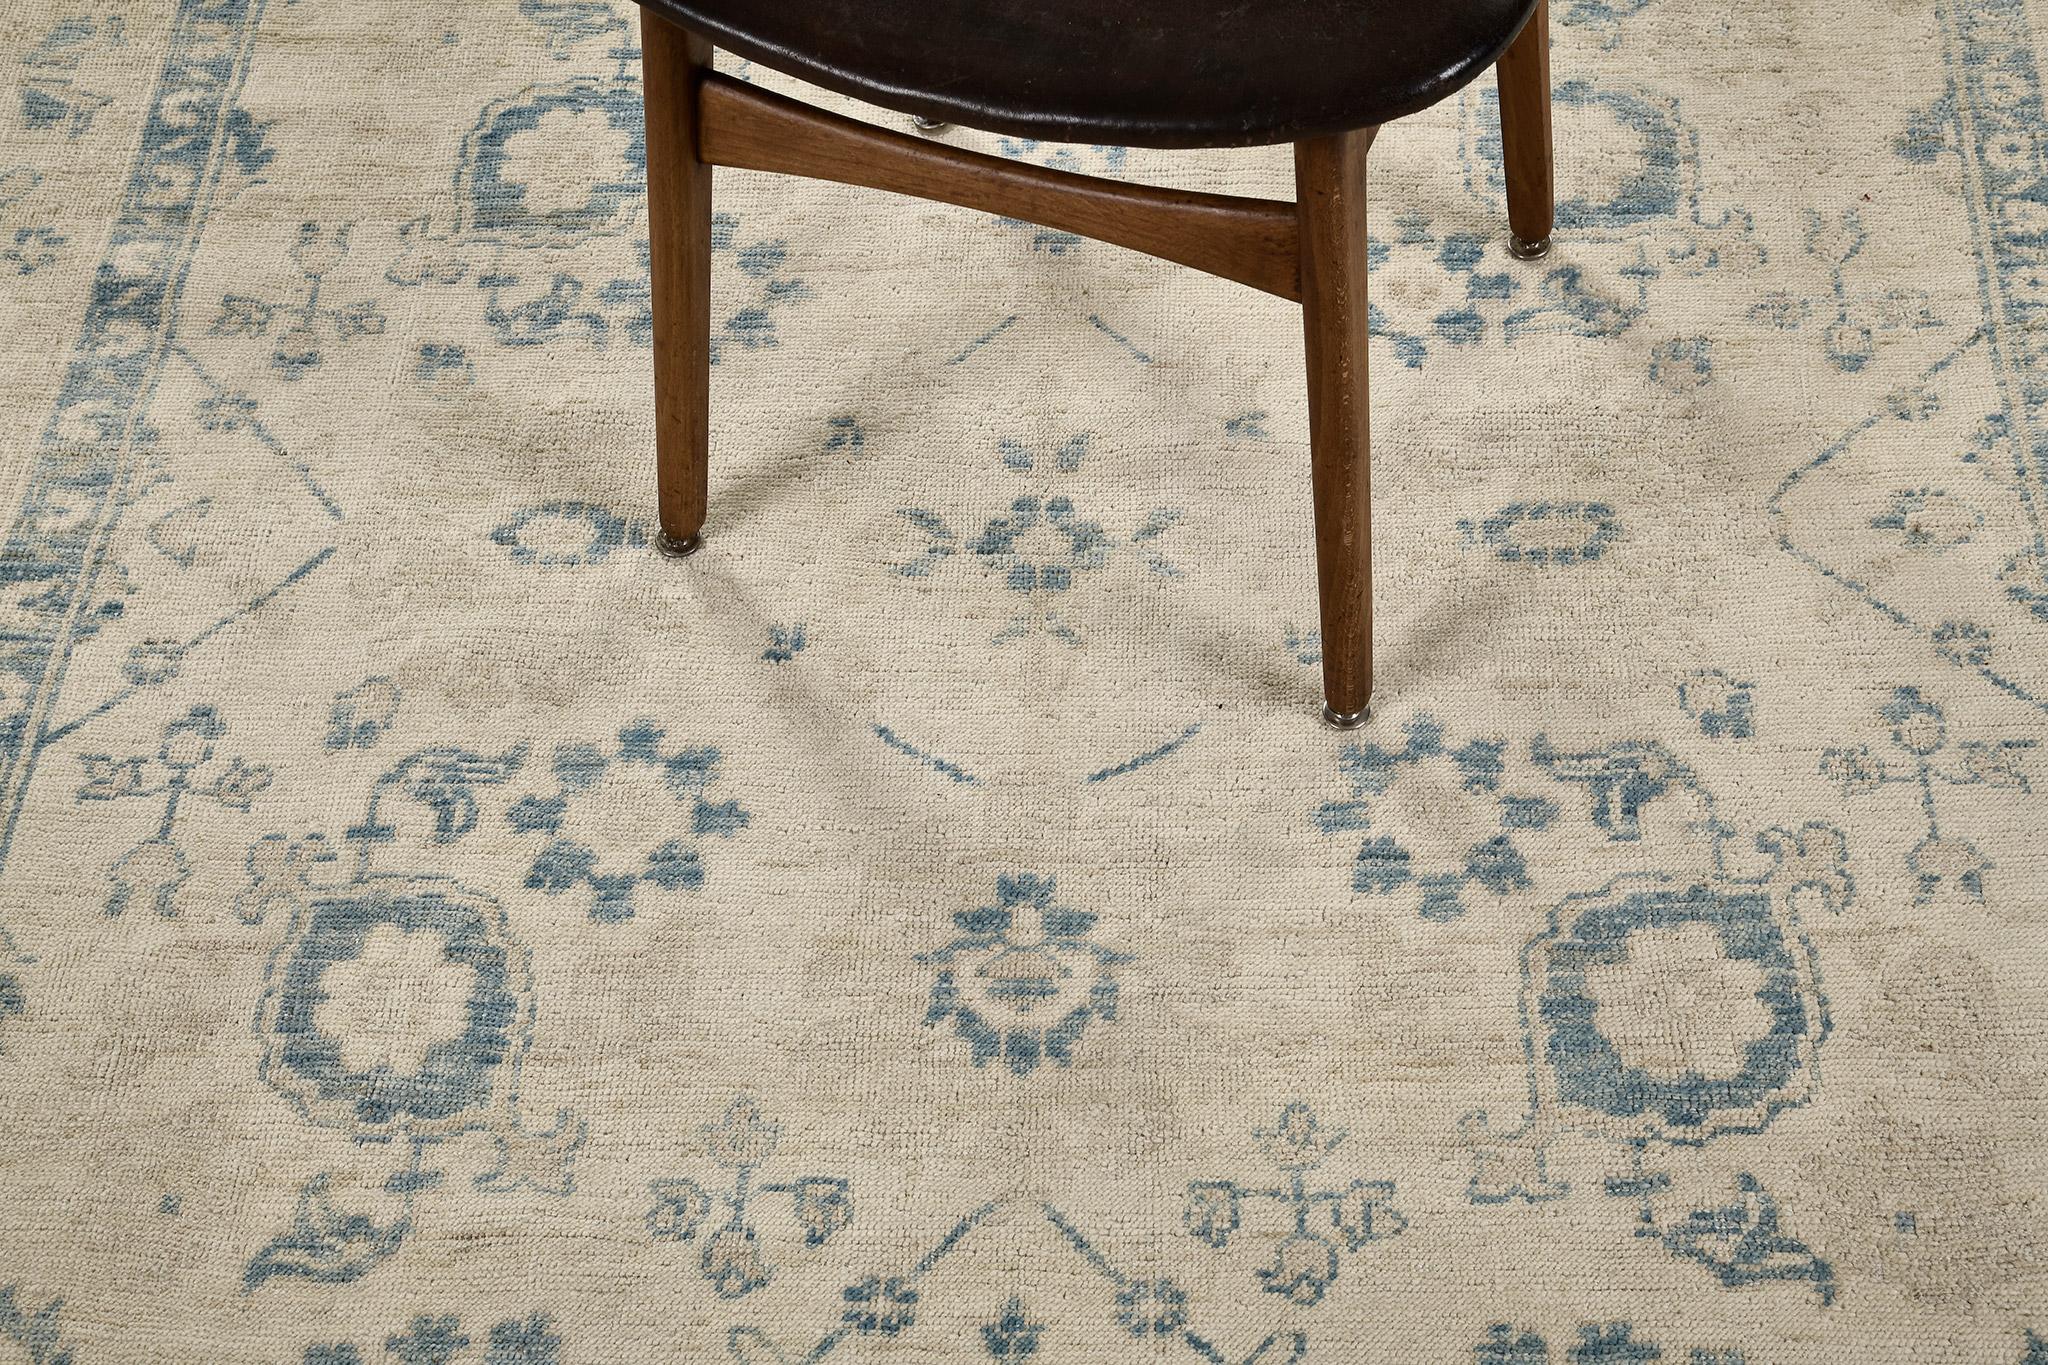 A classy revival of a hand spun wool Safira Collection of Khotan rug, lit the strong points of a contrast of blue and beige. Symbols andotifs are aligned that have spaces at the center filled with varying vines and florid elements. Cozy traditional